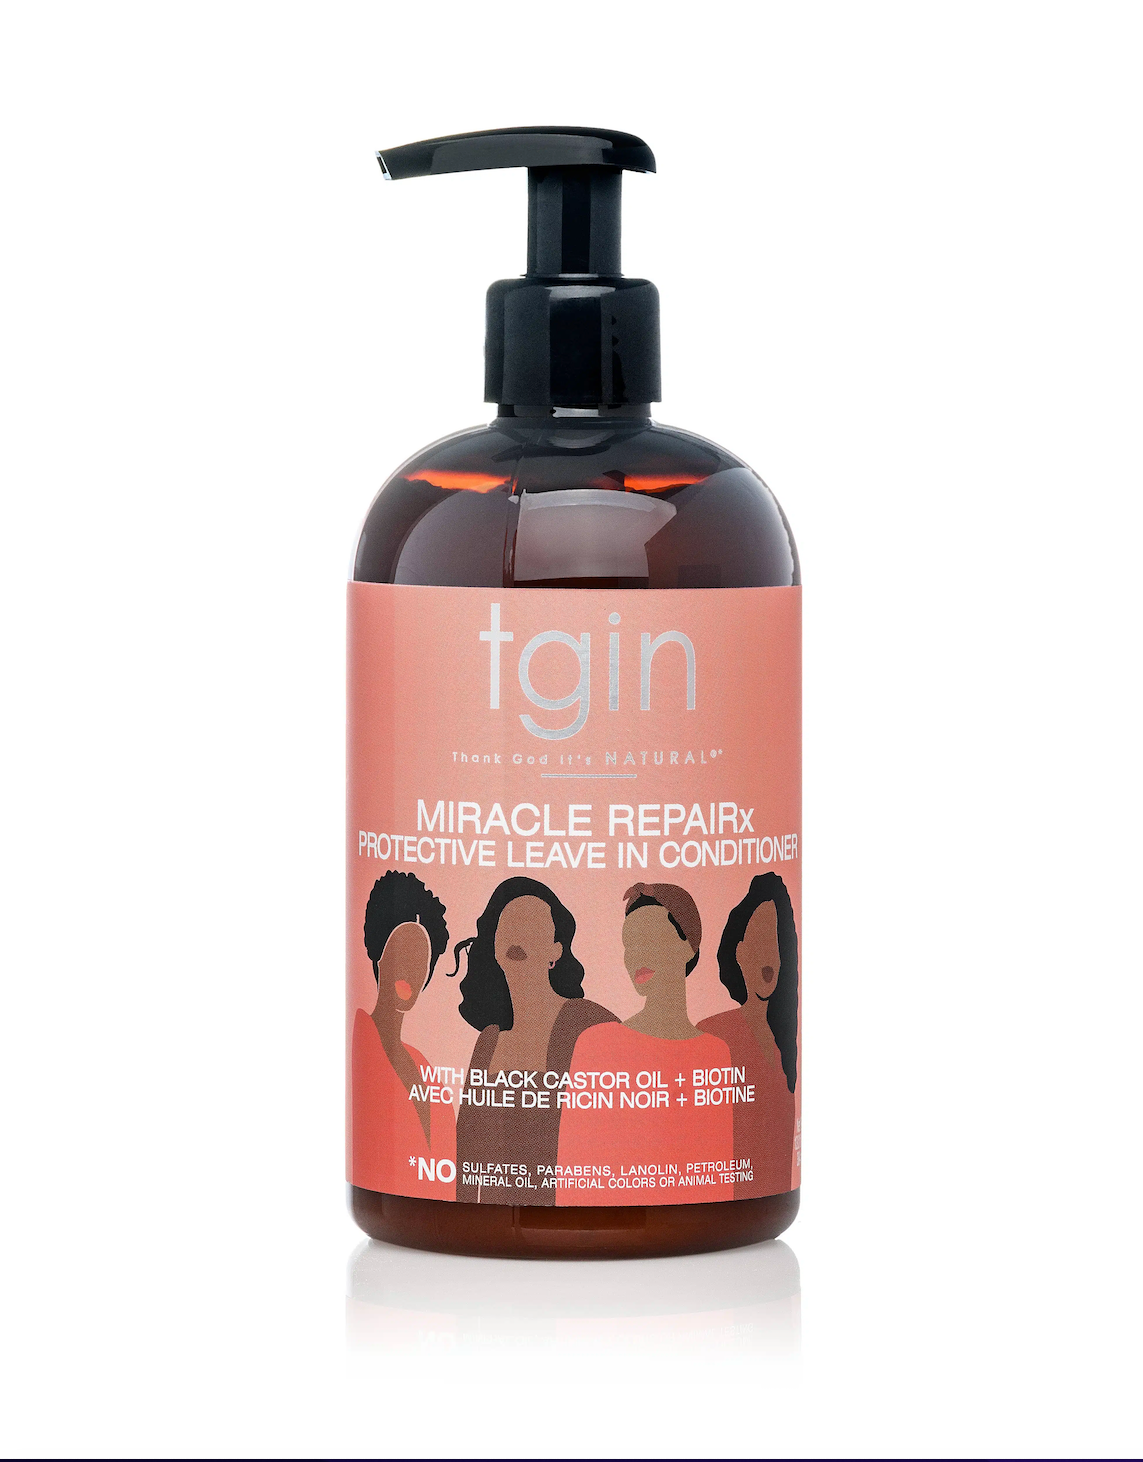 TGIN Limited Edition - Miracle RepaiRx Protective Leave in Conditioner